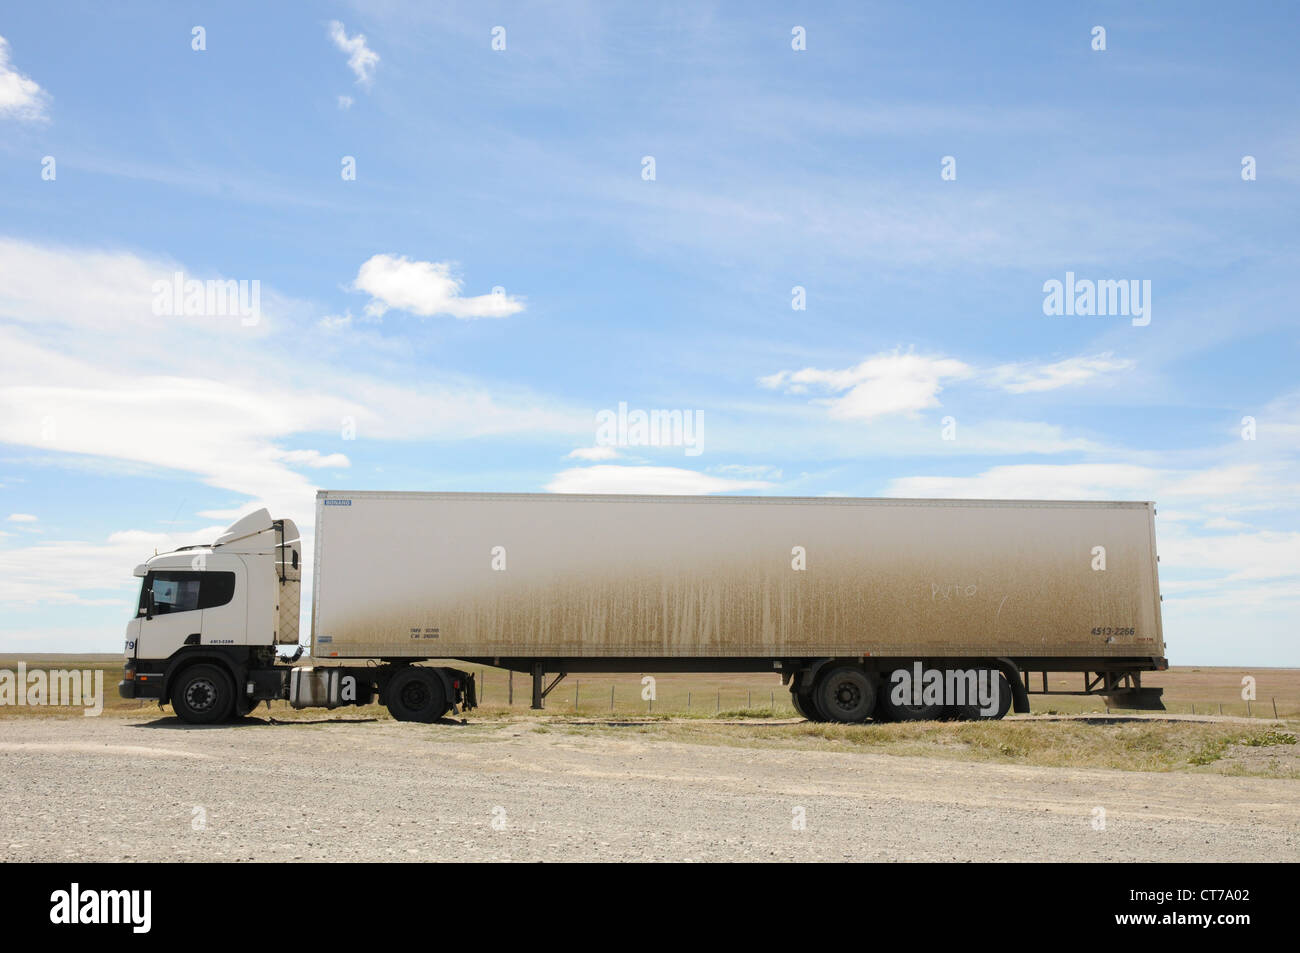 Lorry, truck, articulated lorry, blank white side, open sky, Patagonia, Chile. Stock Photo